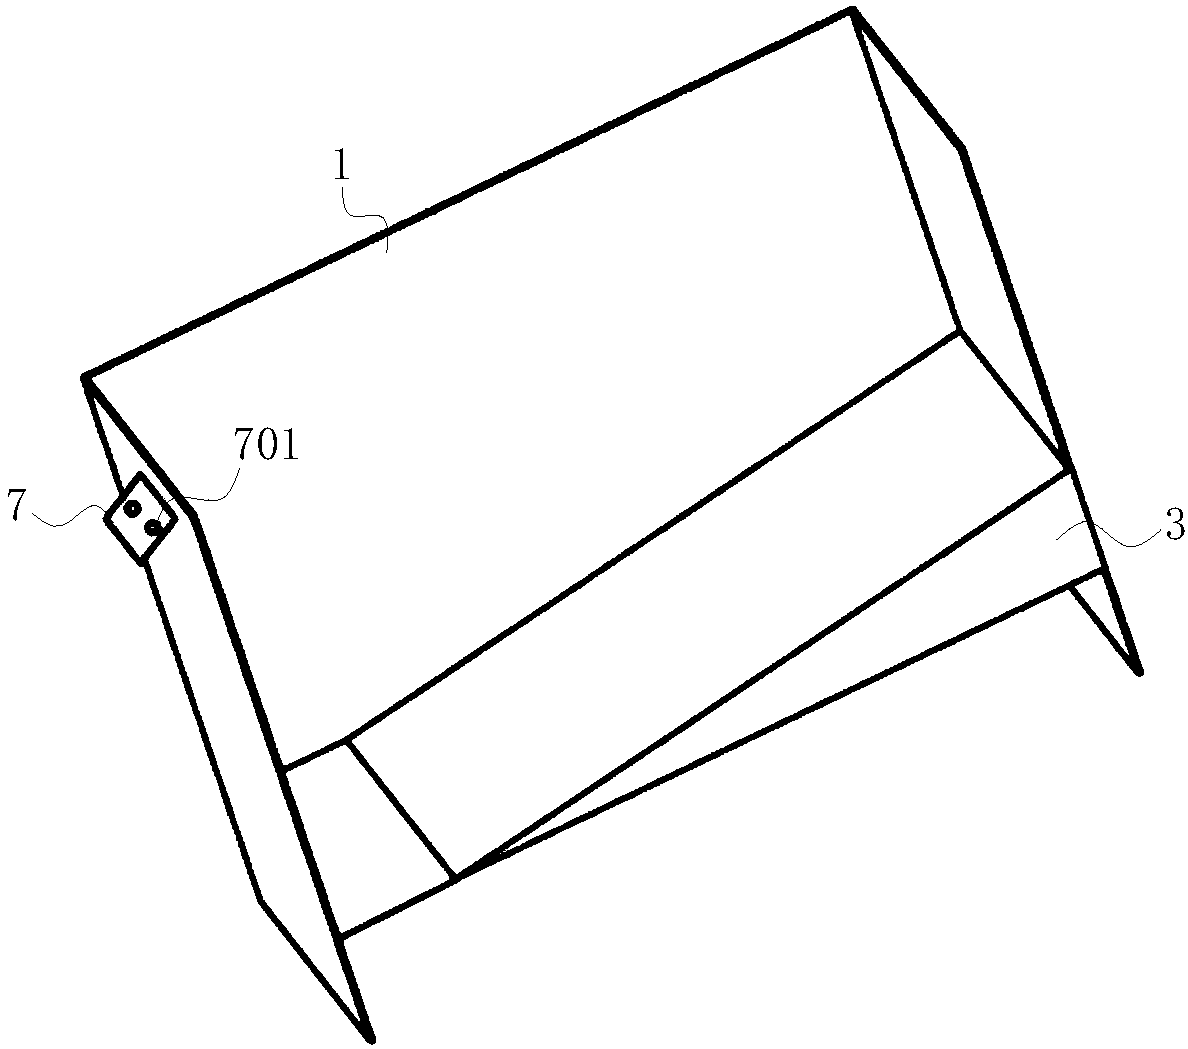 An automatic throwing cylinder device